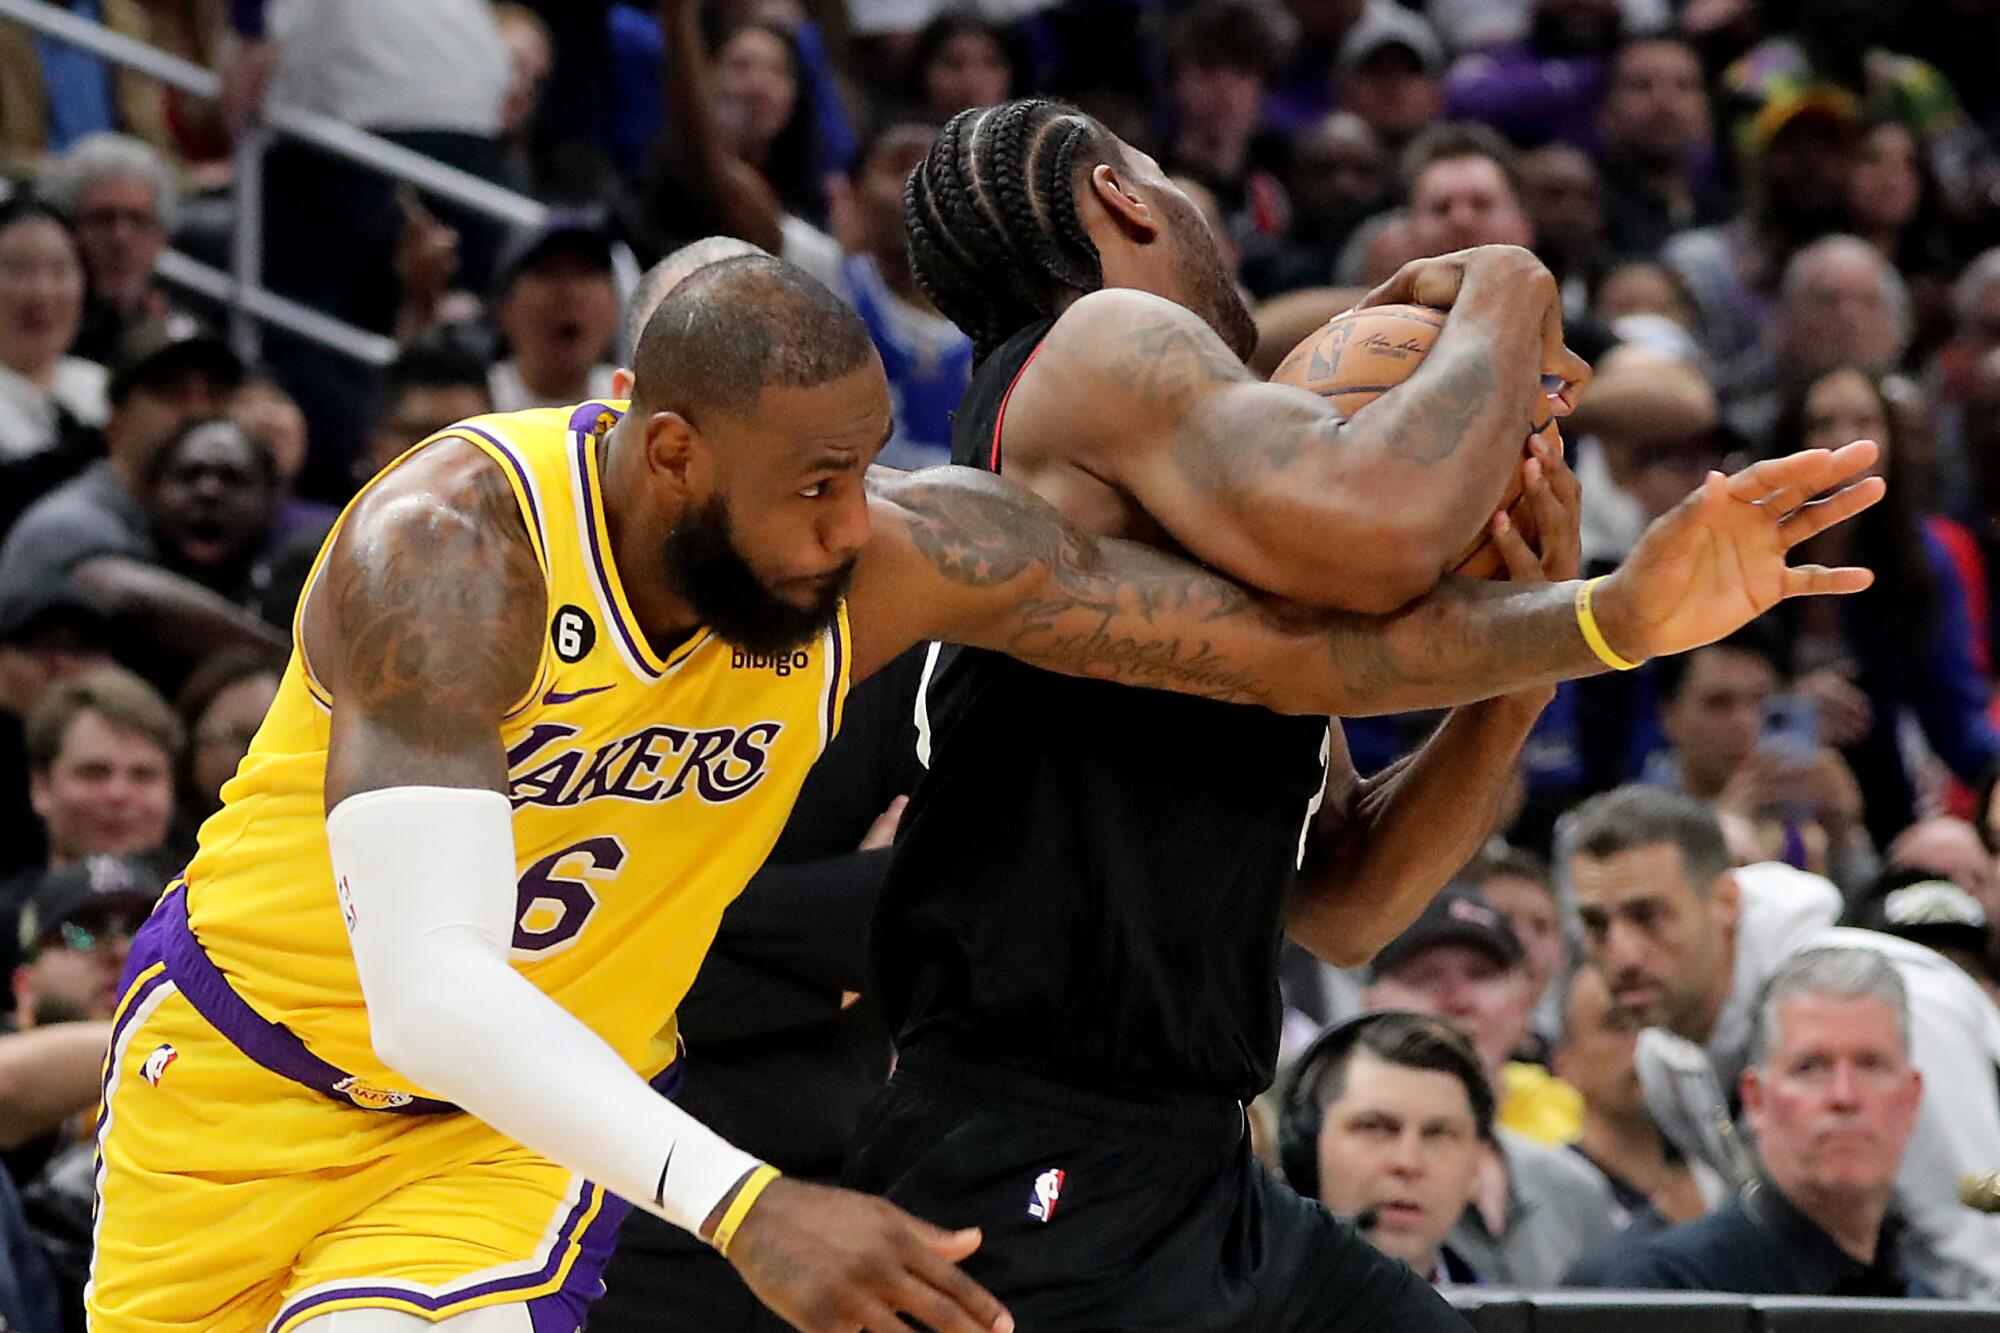 Lakers forward LeBron James, left, gets tangled with Clippers forward Kawhi Leonard as they battle for a loose ball.